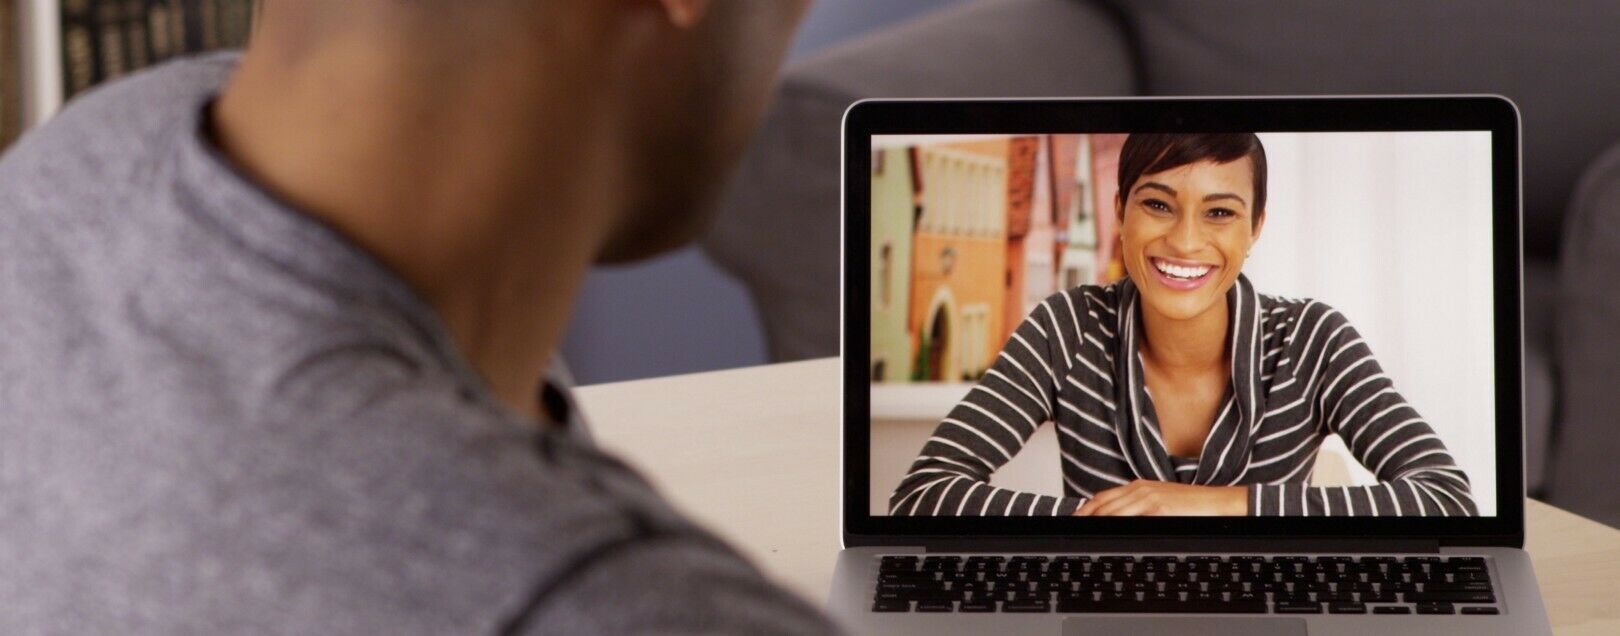 Two people having a discussion over a video conferencing platform. Tools like these make remote user interviews and usability testing possible.